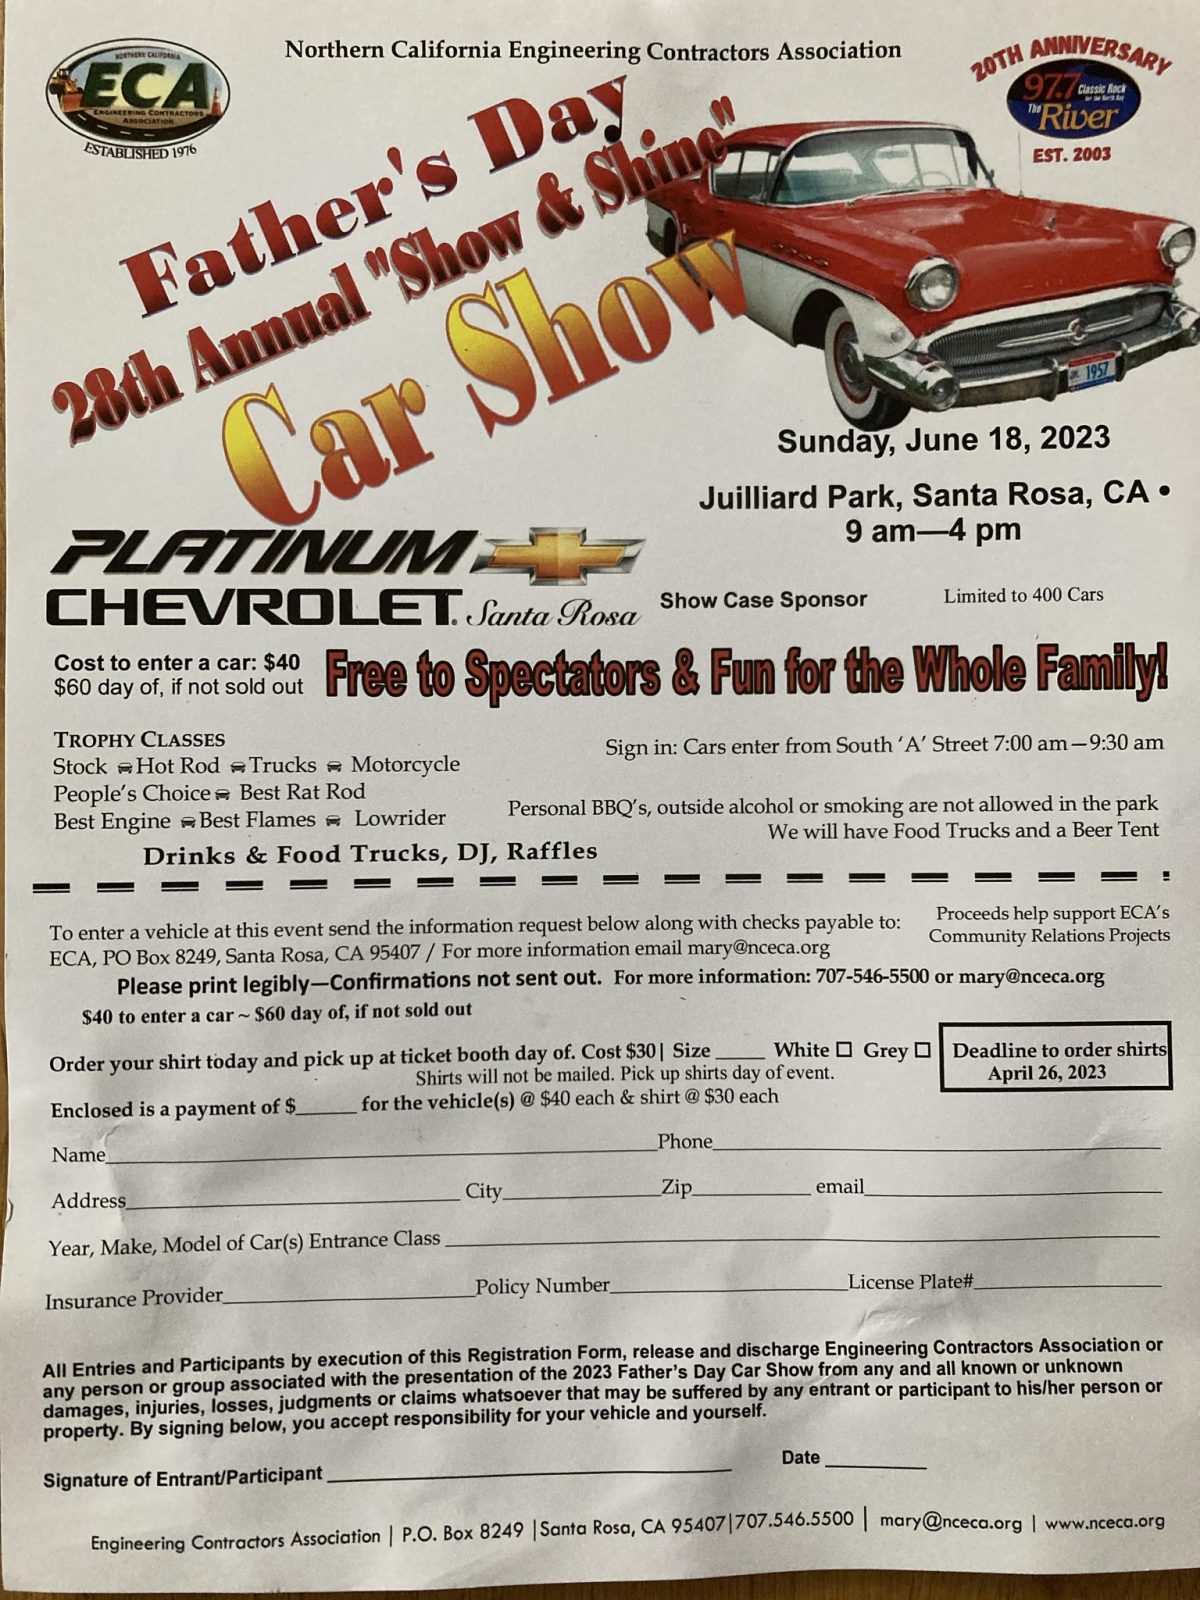 Father’s Day “Show and Shine” Car Show